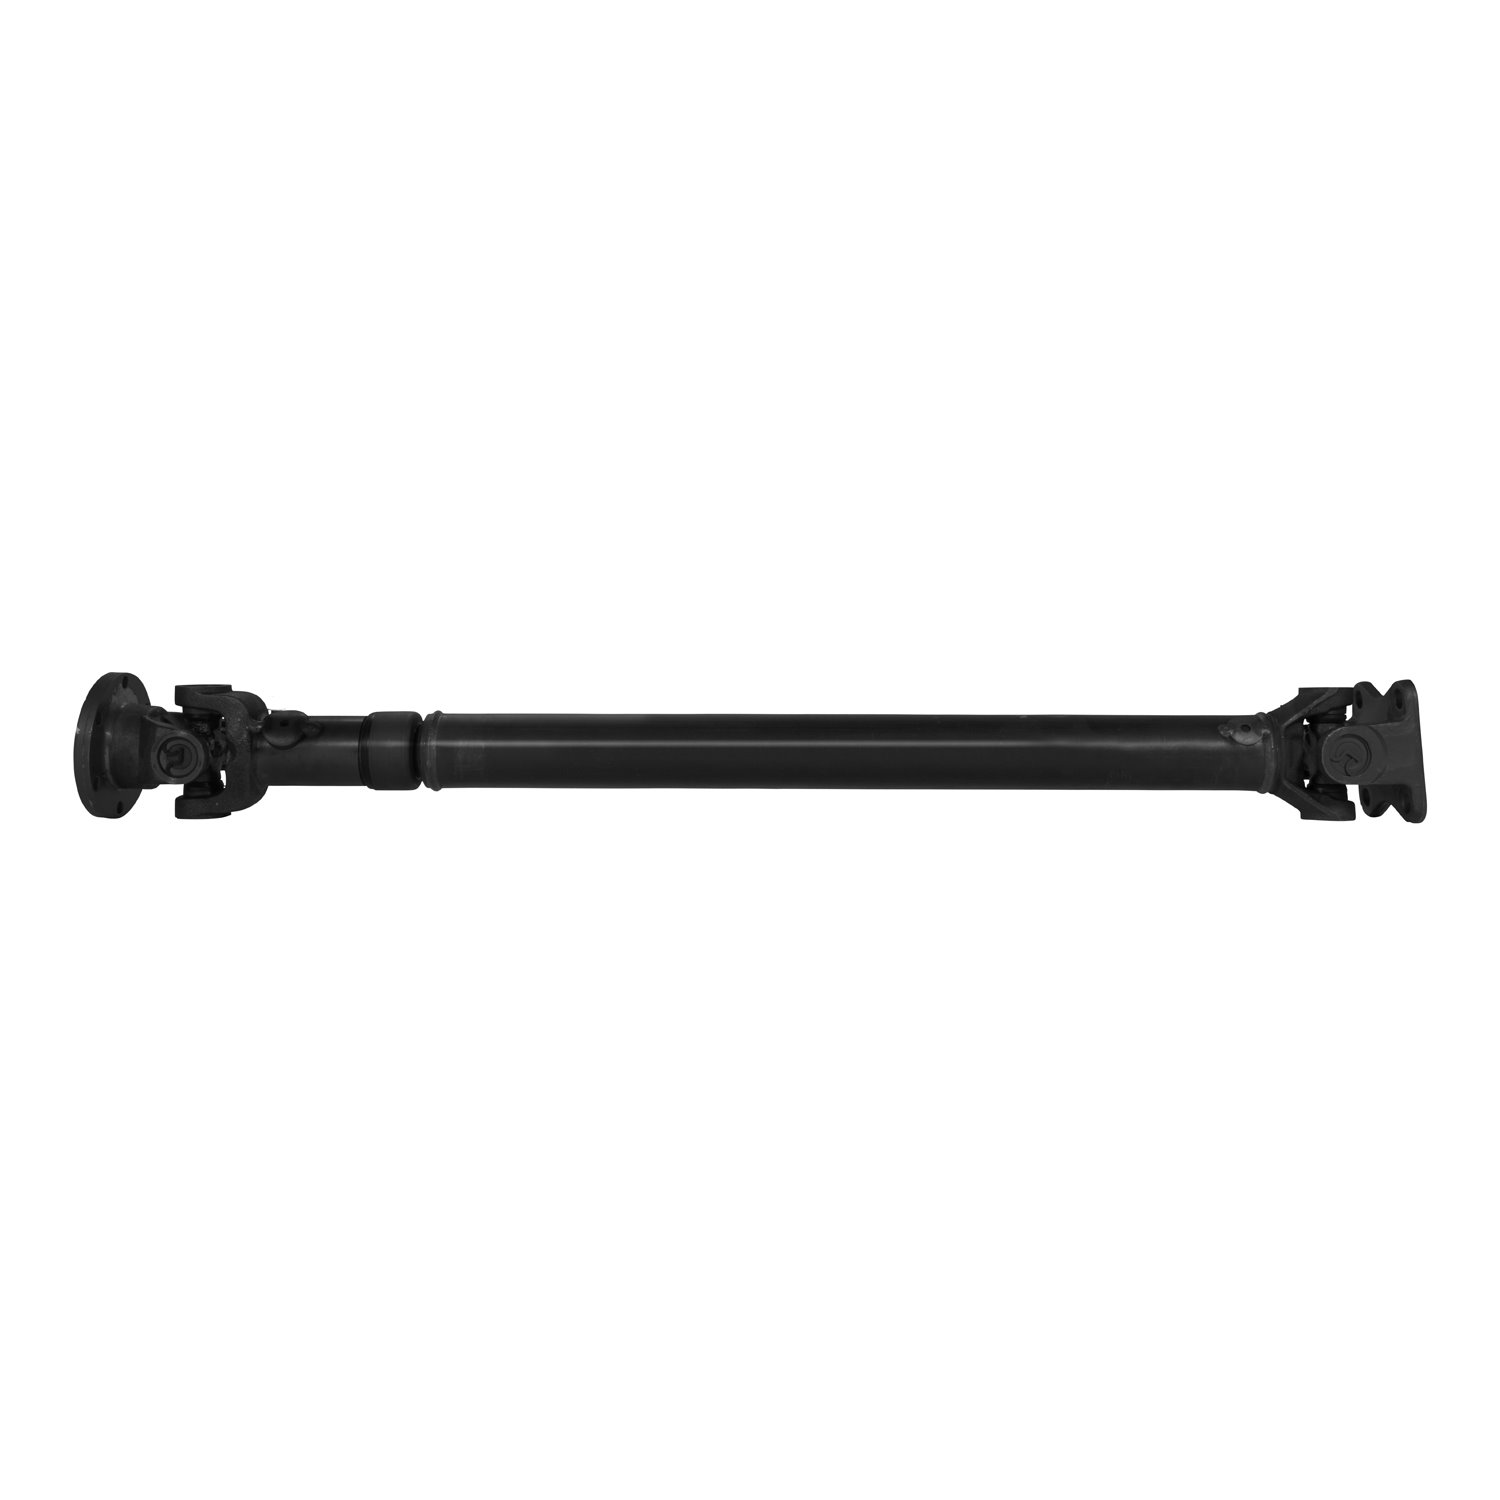 USA Standard 44616 Front Driveshaft, For Grand Cherokee, 34-1/4 in. Flange To Flange